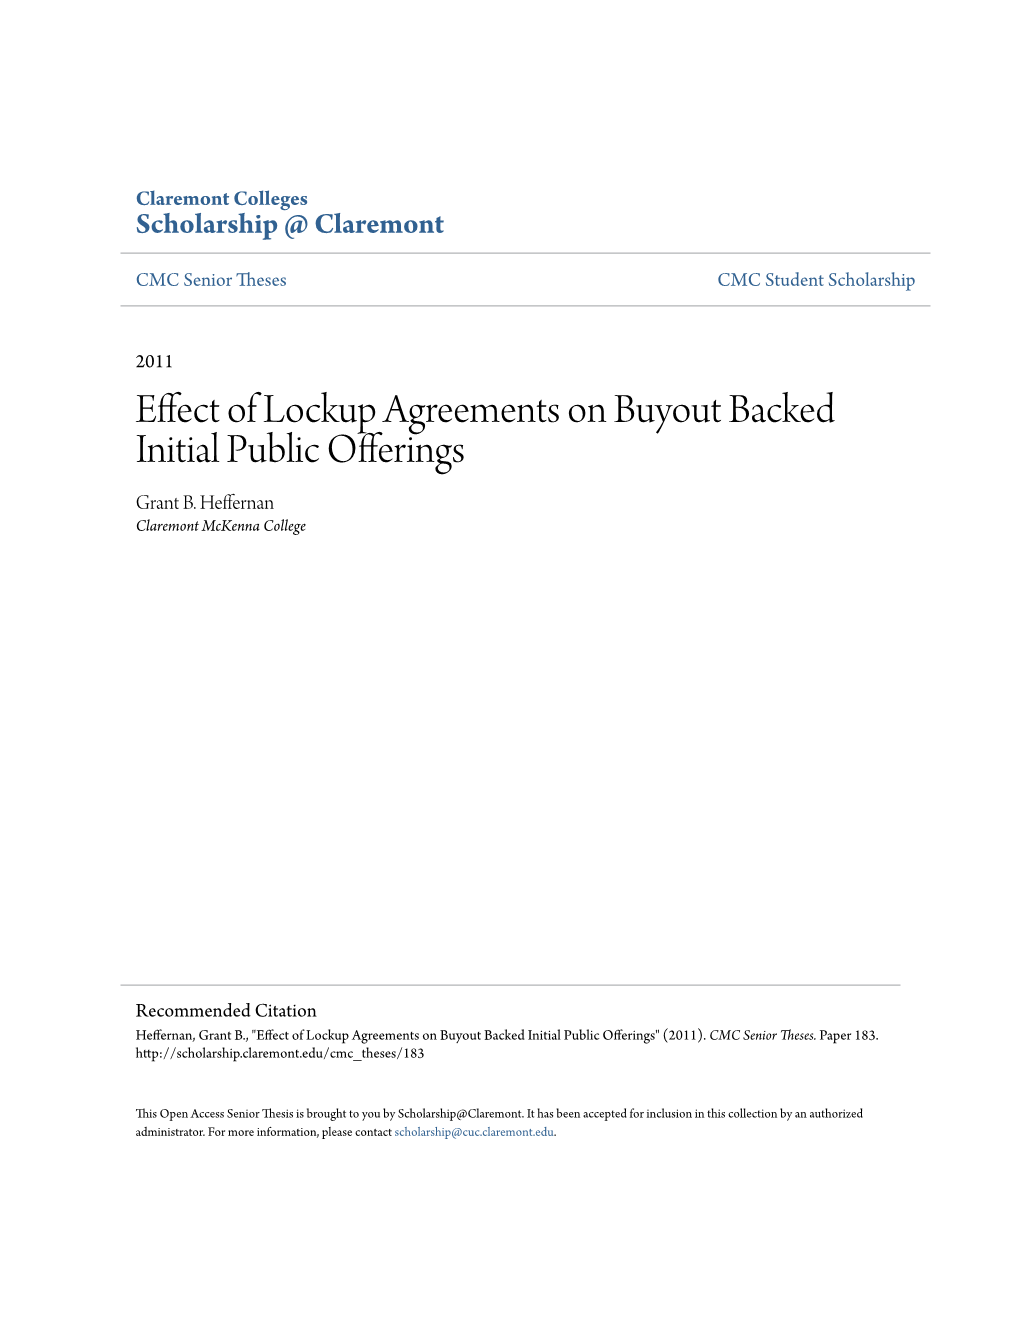 Effect of Lockup Agreements on Buyout Backed Initial Public Offerings Grant B